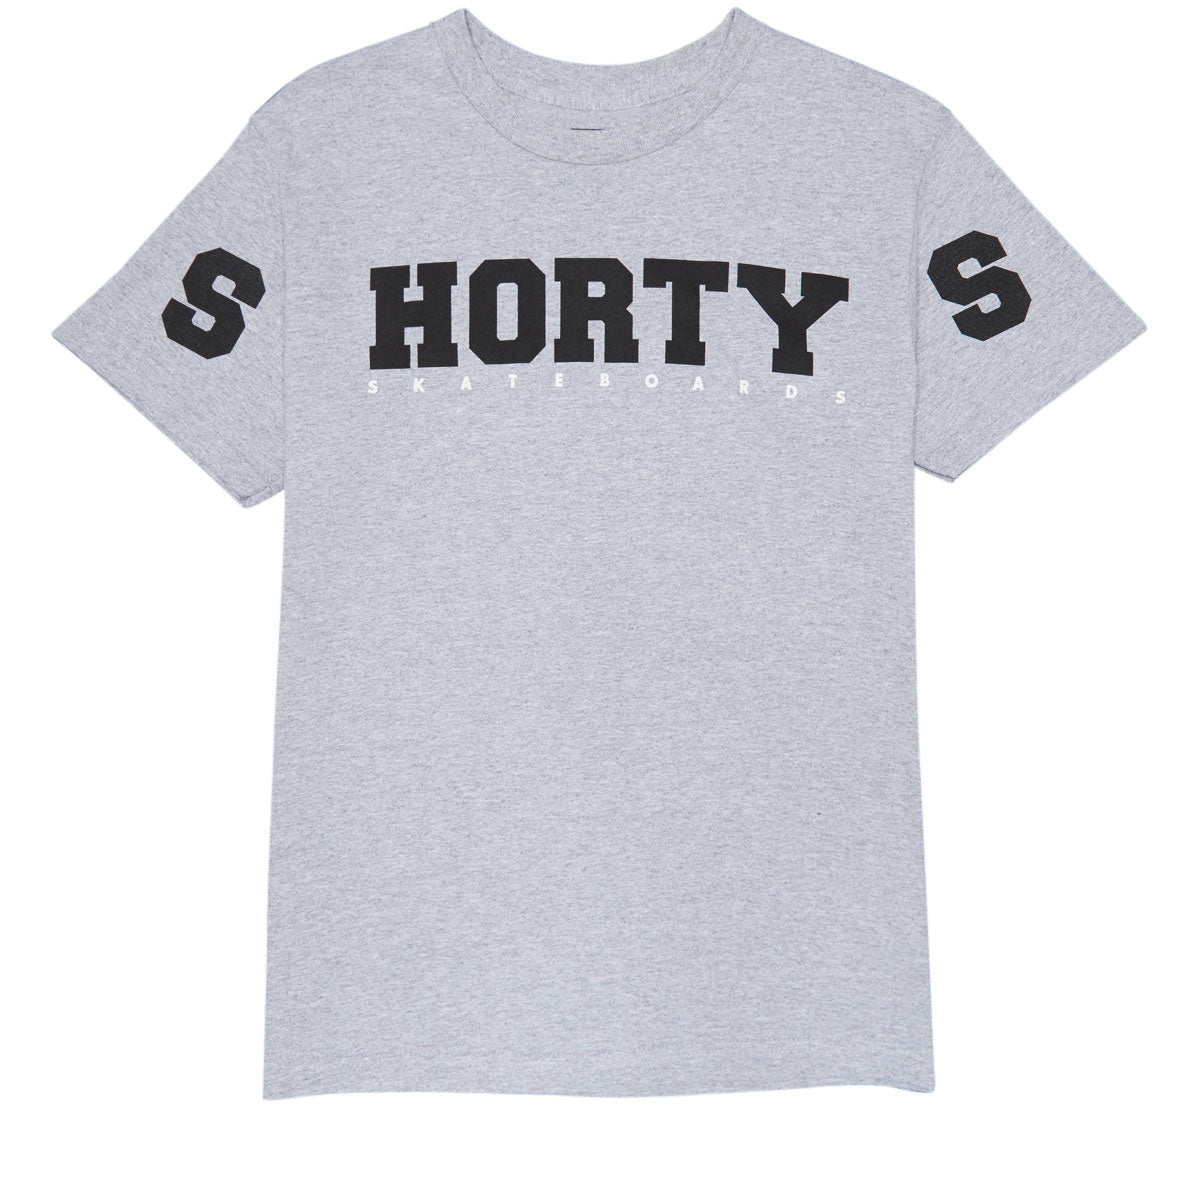 Shorty's S-horty-S T-Shirt - Grey image 1